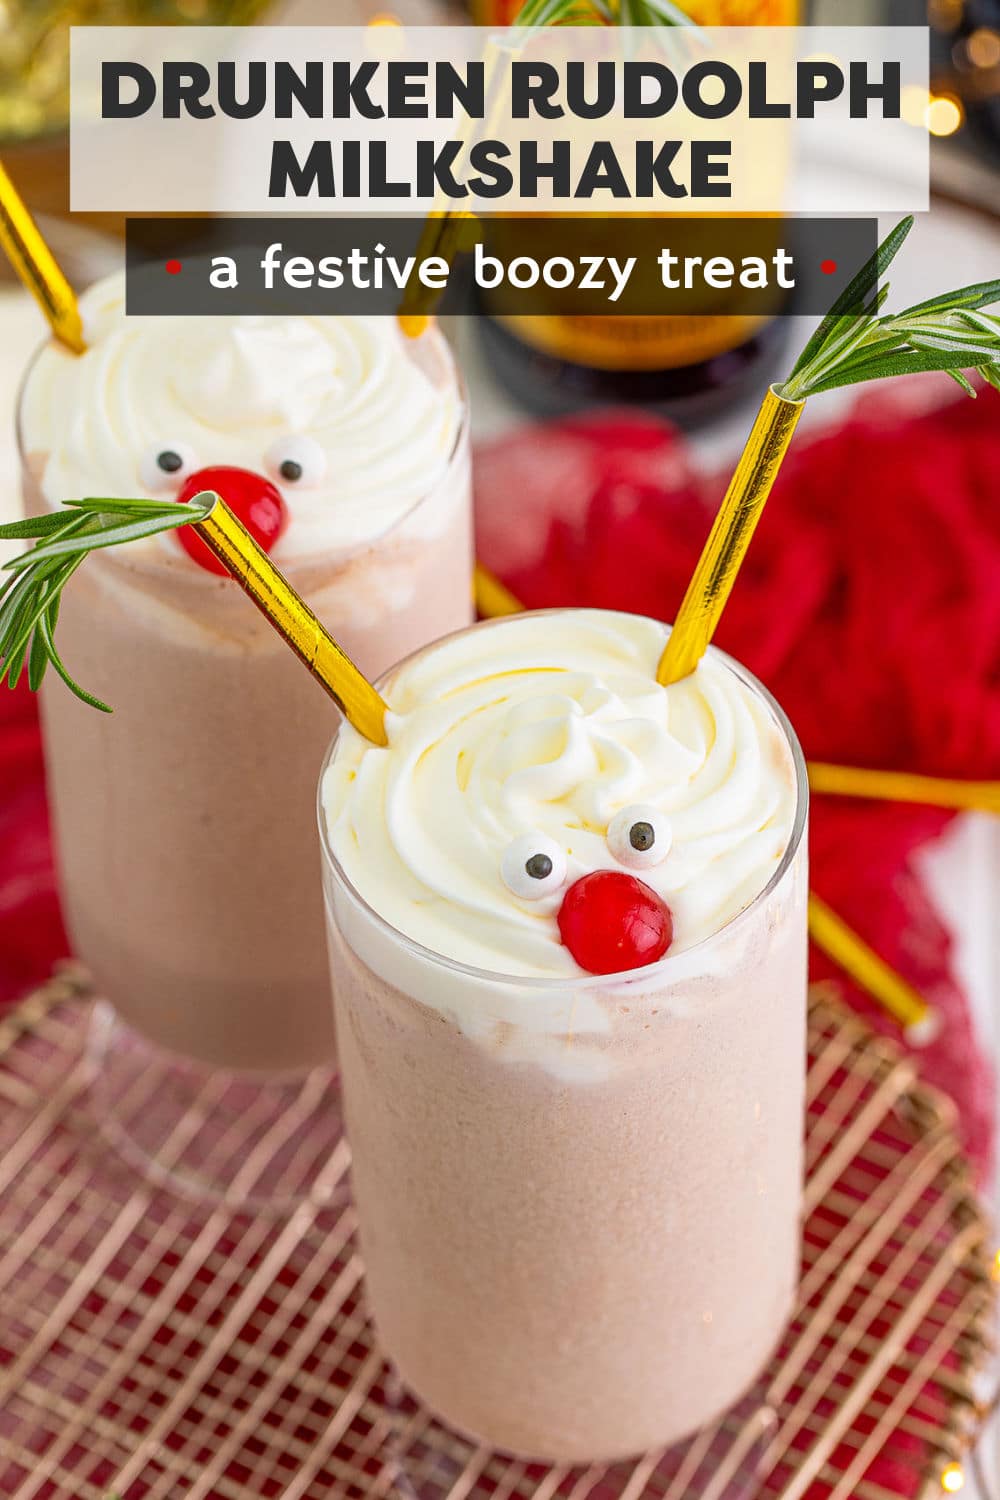 Decorate your spiked milkshake with whipped topping and Rudolph’s face this holiday season! This Drunk Rudolph Milkshake is an adorably festive, thick, and creamy cocktail and couldn’t be easier to make. All you need is vanilla ice cream, 3 kinds of liqueur, and a hot chocolate mix! | www.persnicketyplates.com